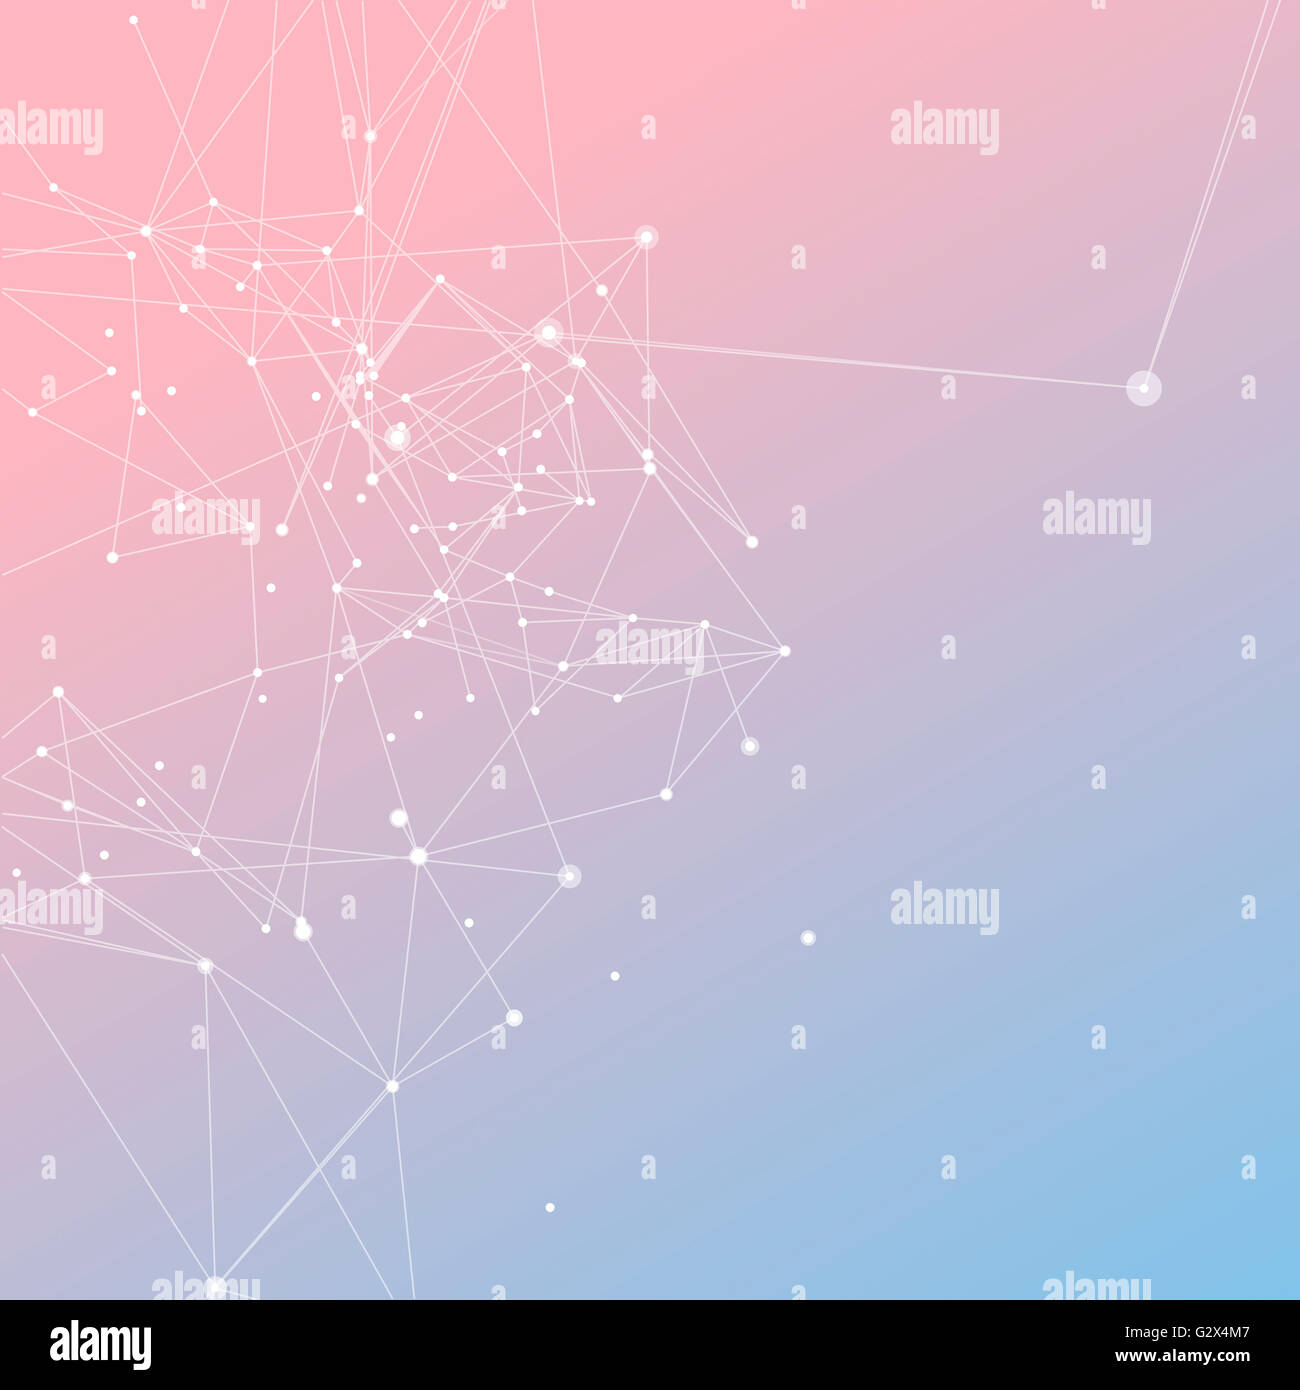 White connecting dots with lines on Pantone color mix (“the blending of two shades”—Rose Quartz (baby pink) and Serenity Stock Photo